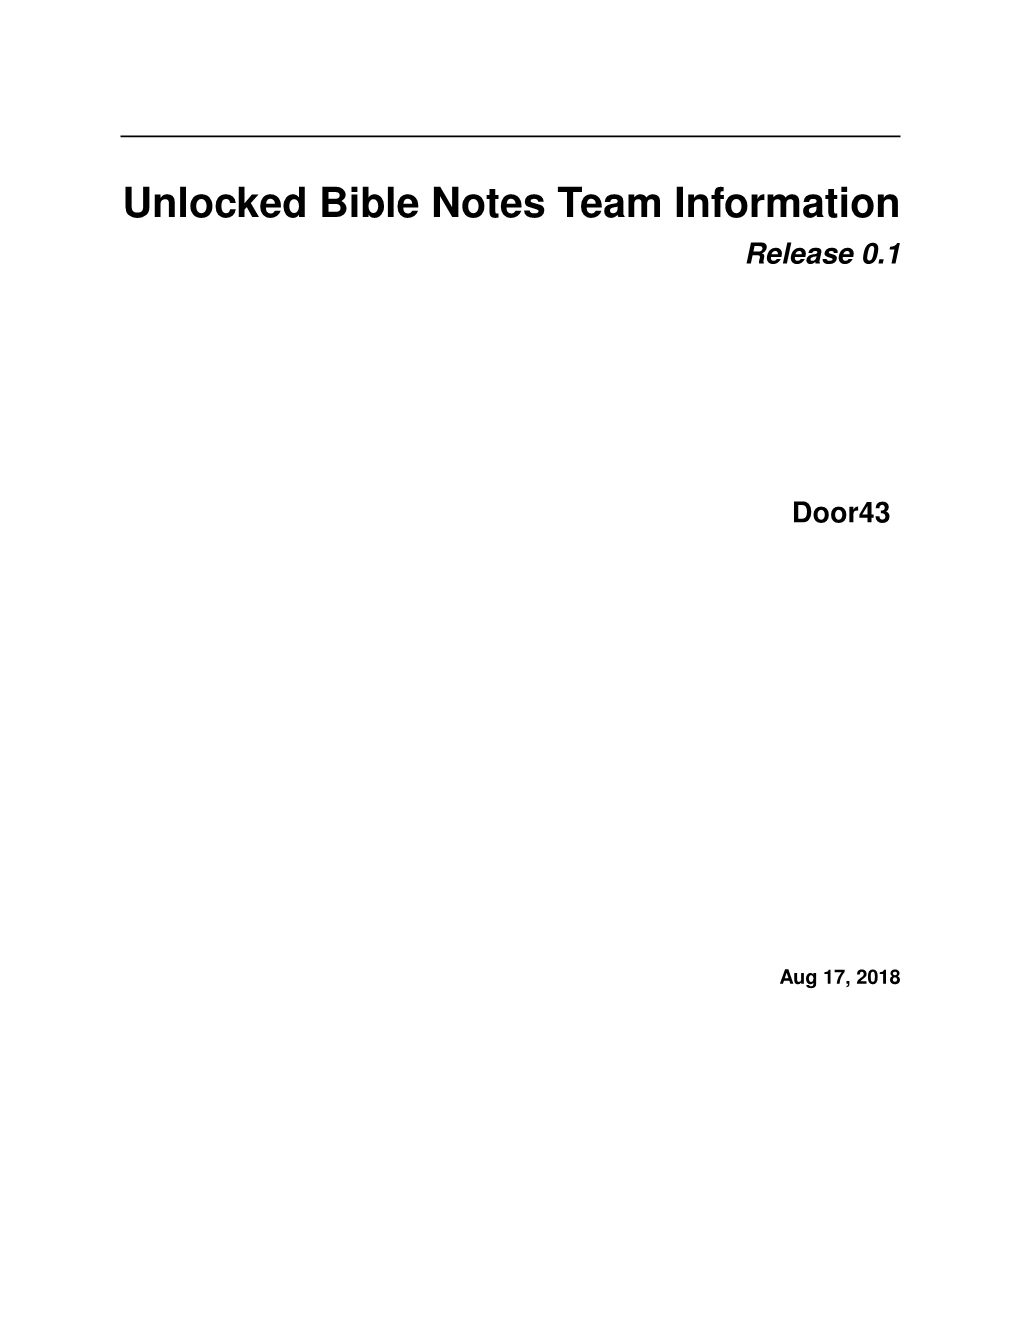 Unlocked Bible Notes Team Information Release 0.1